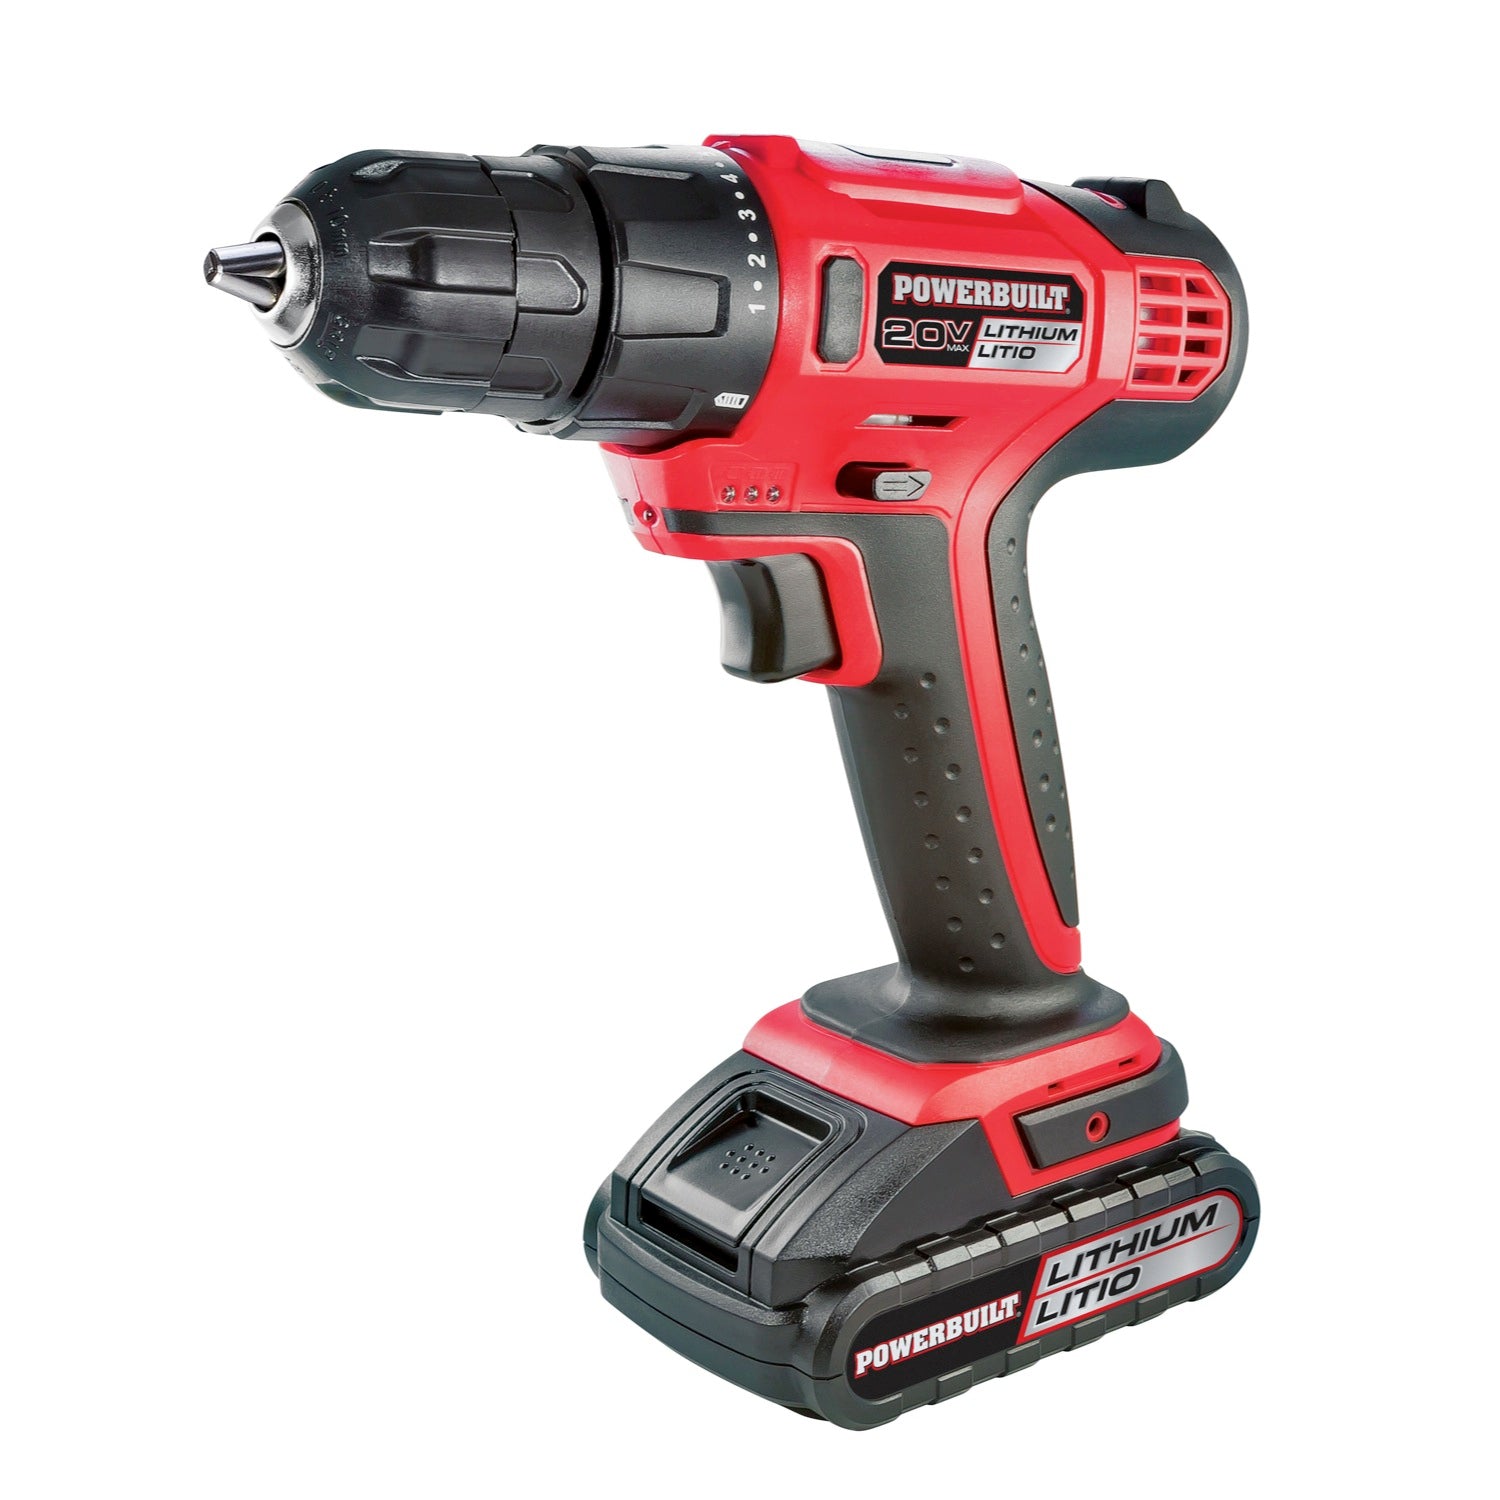 20V Lithium-Ion Cordless Drill (No Carry Case)